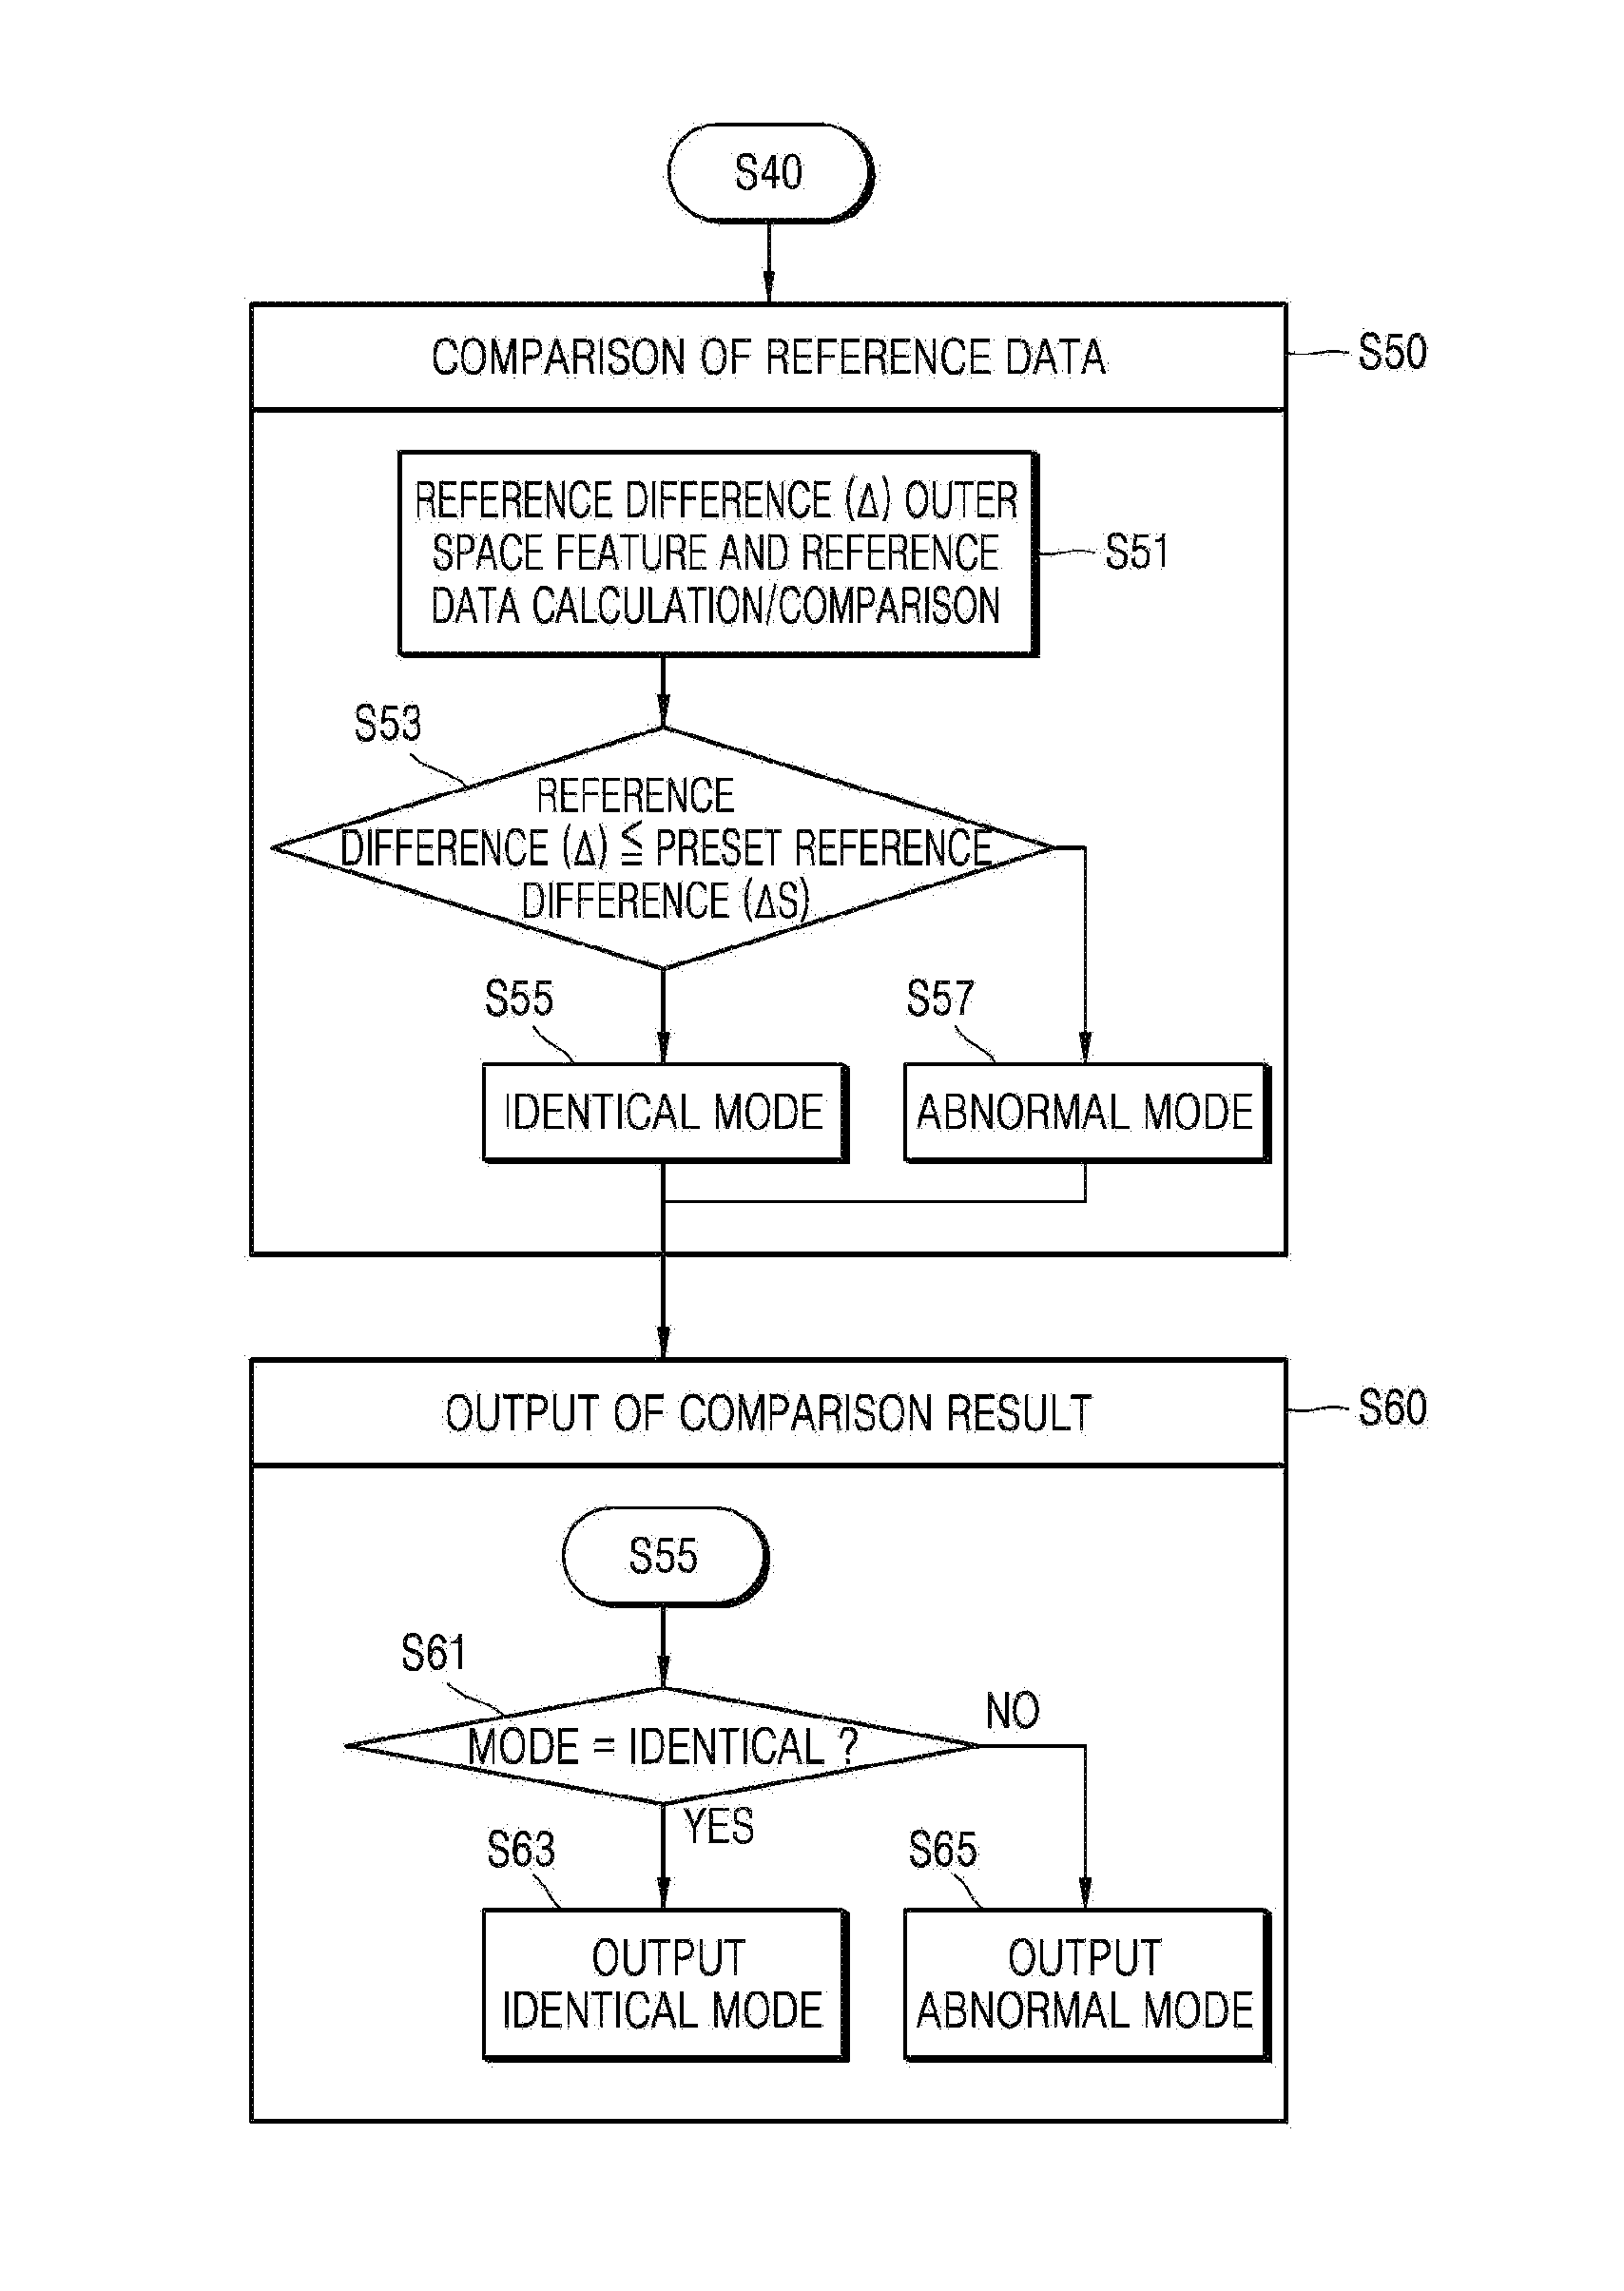 Method for extracting outer space feature information from spatial geometric data